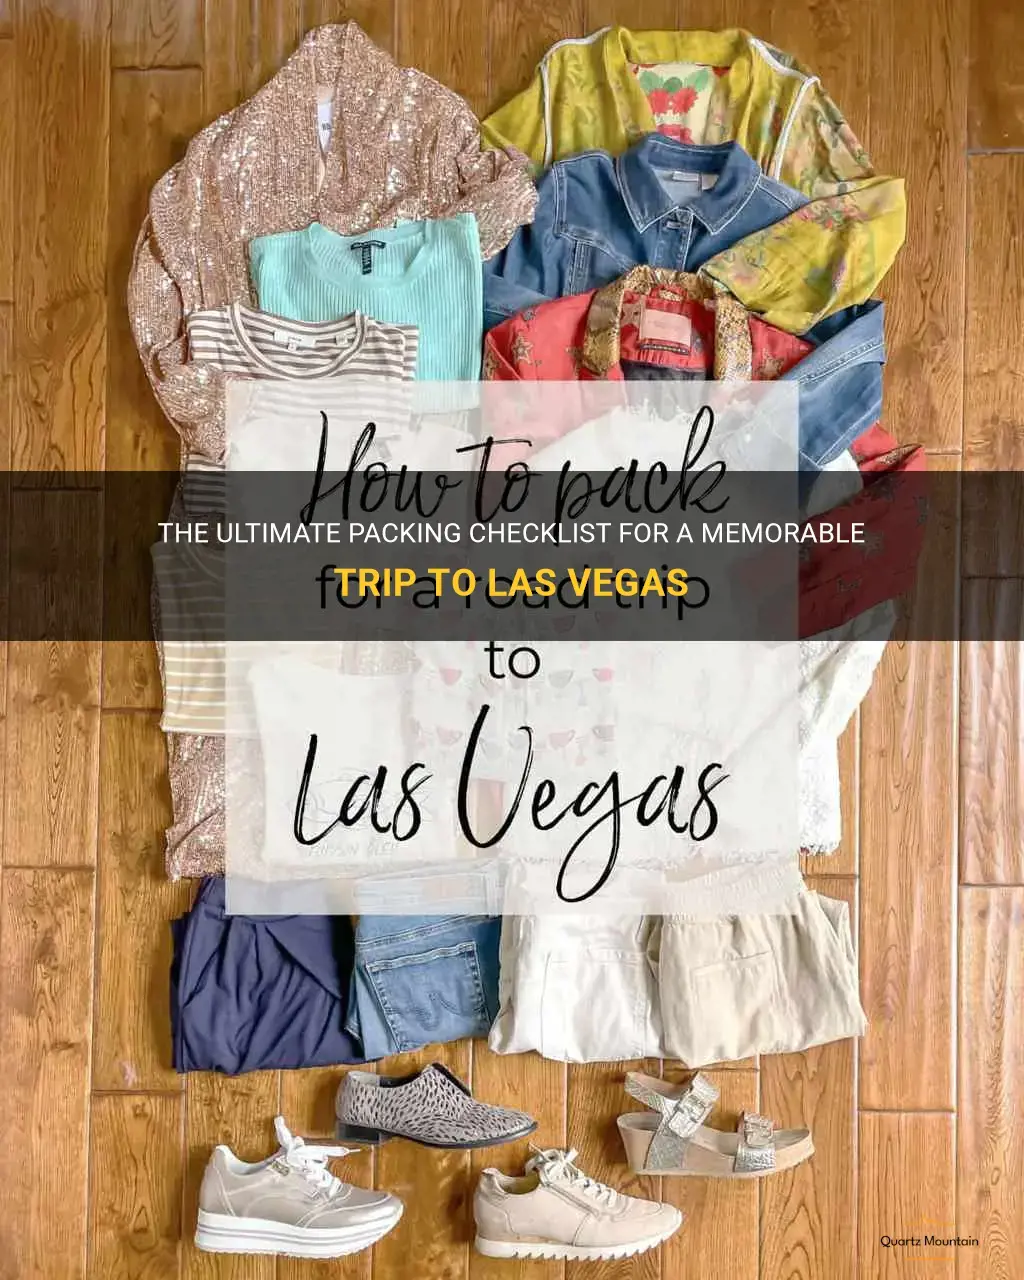 what do I pack for a trip to las vegas